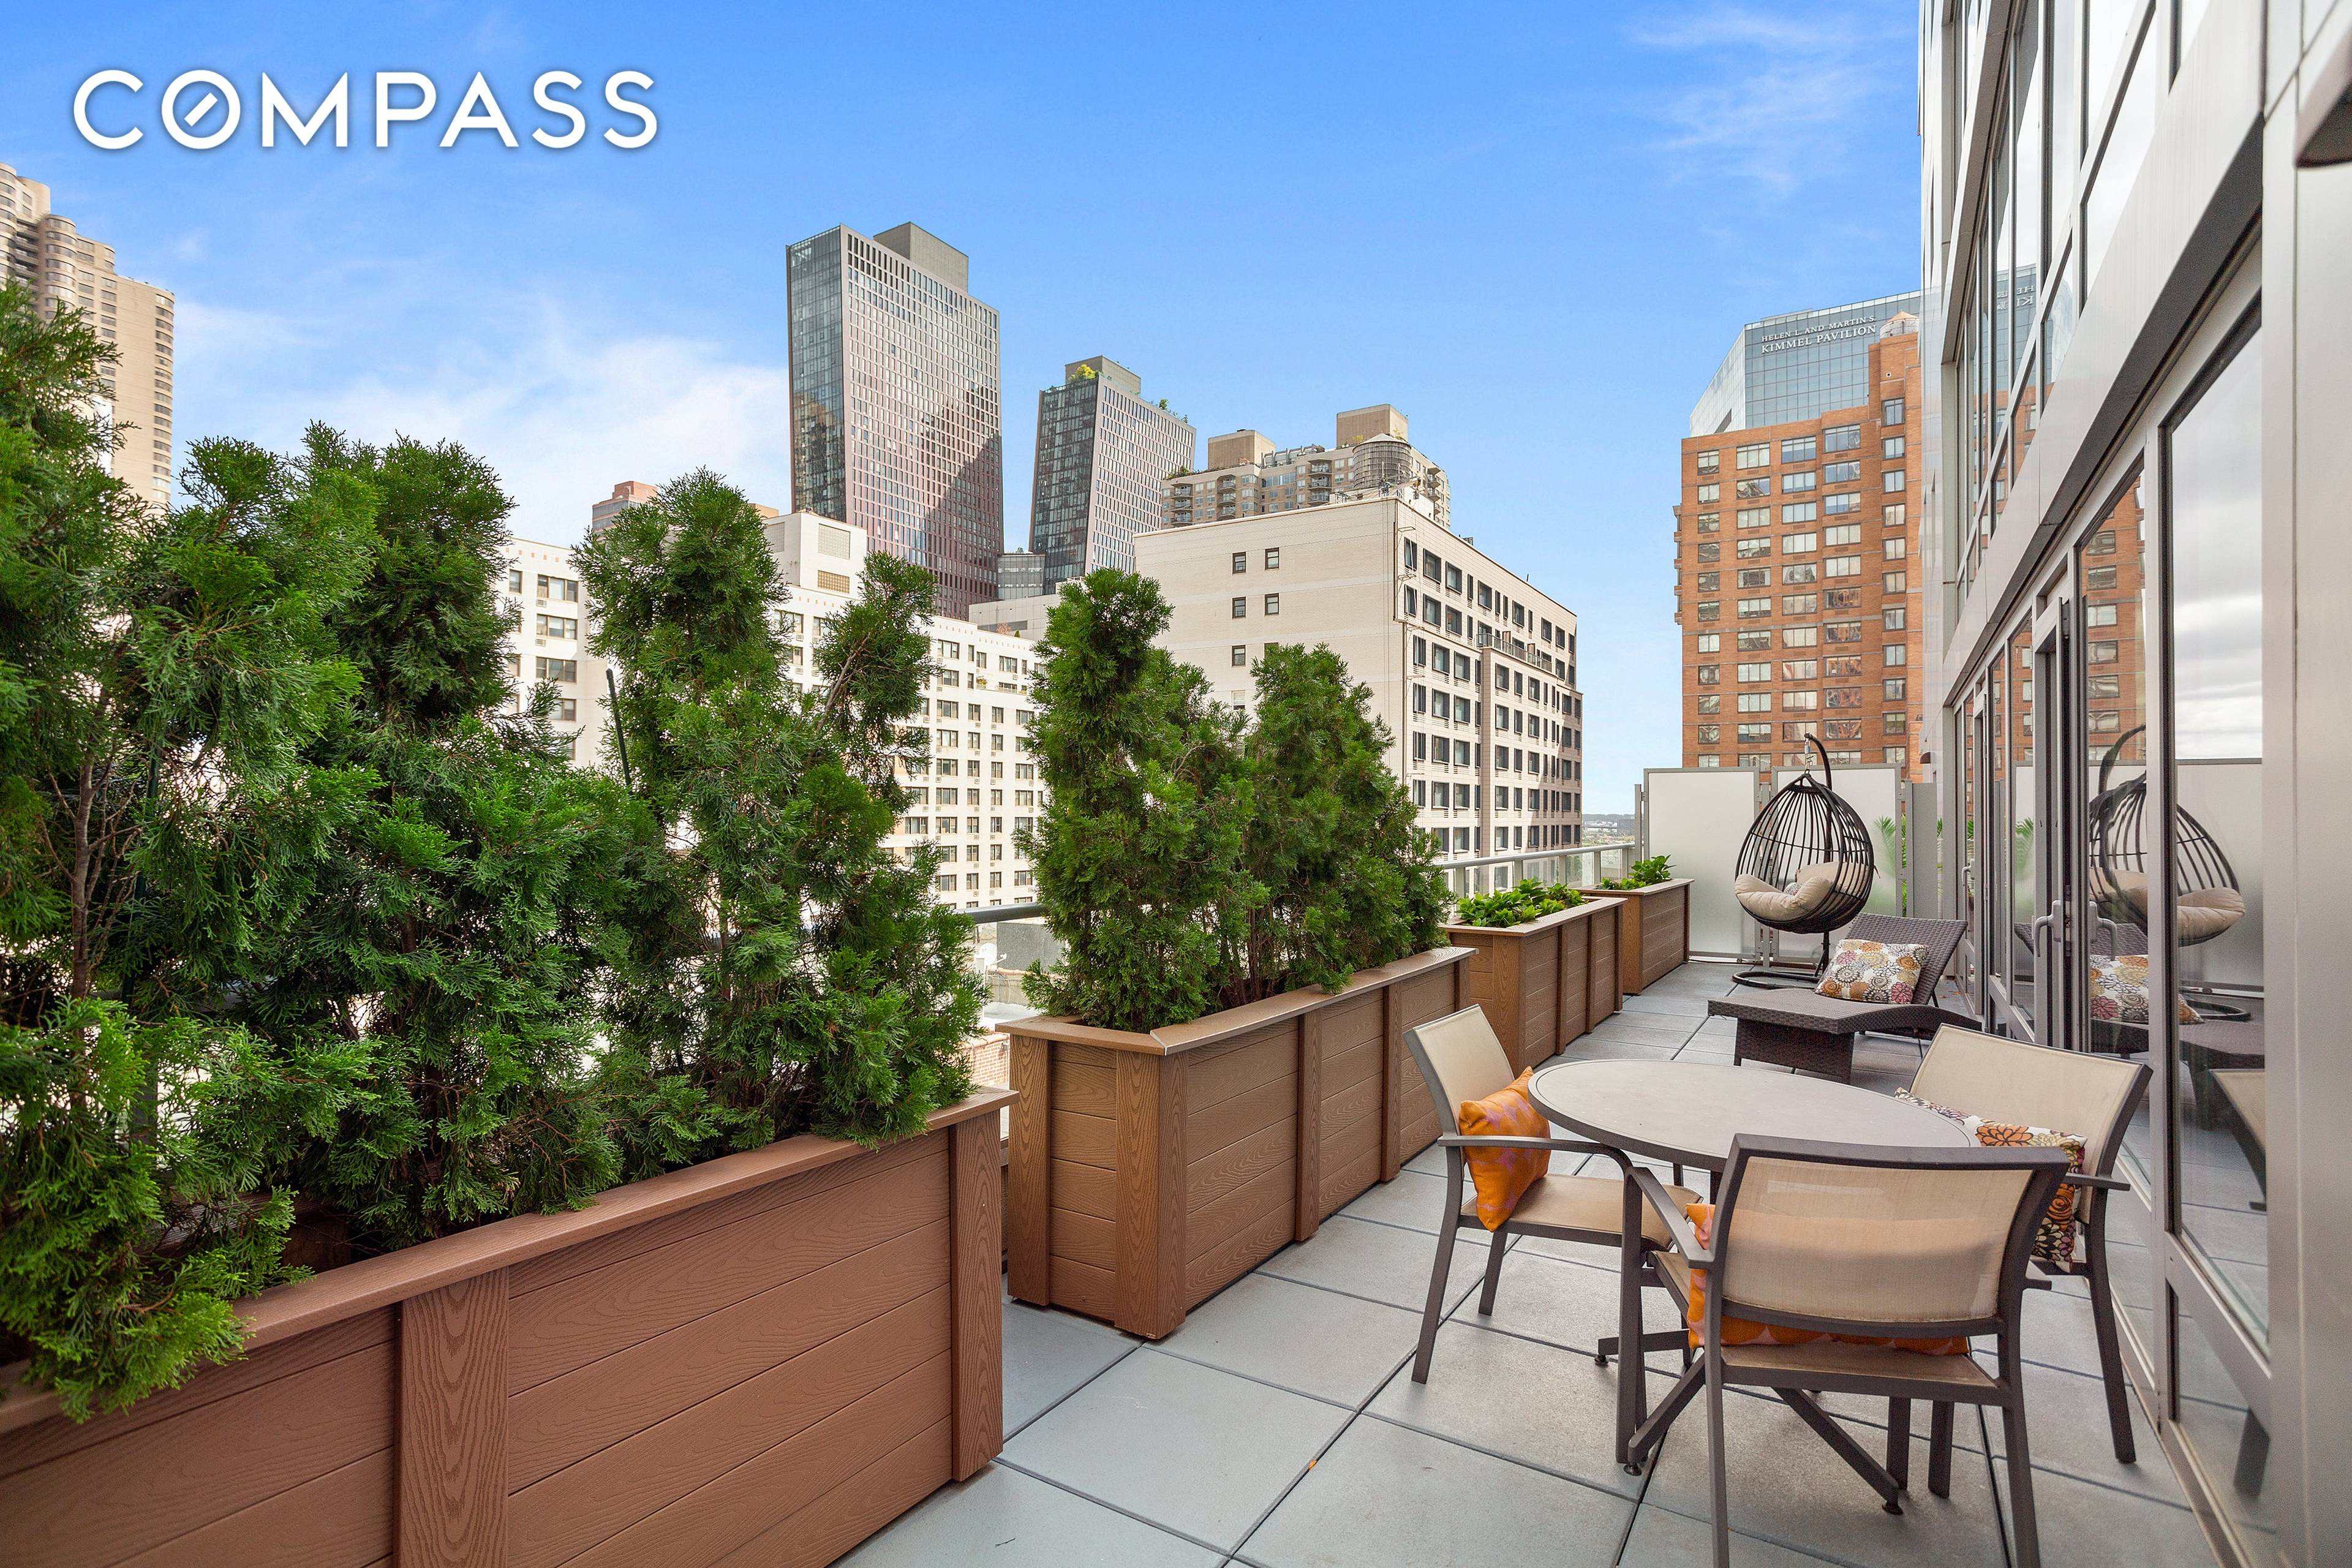 Move In Now ! 303 East 33rd Street is a new, full service, LEED certified condominium building, located in Murray Hill.